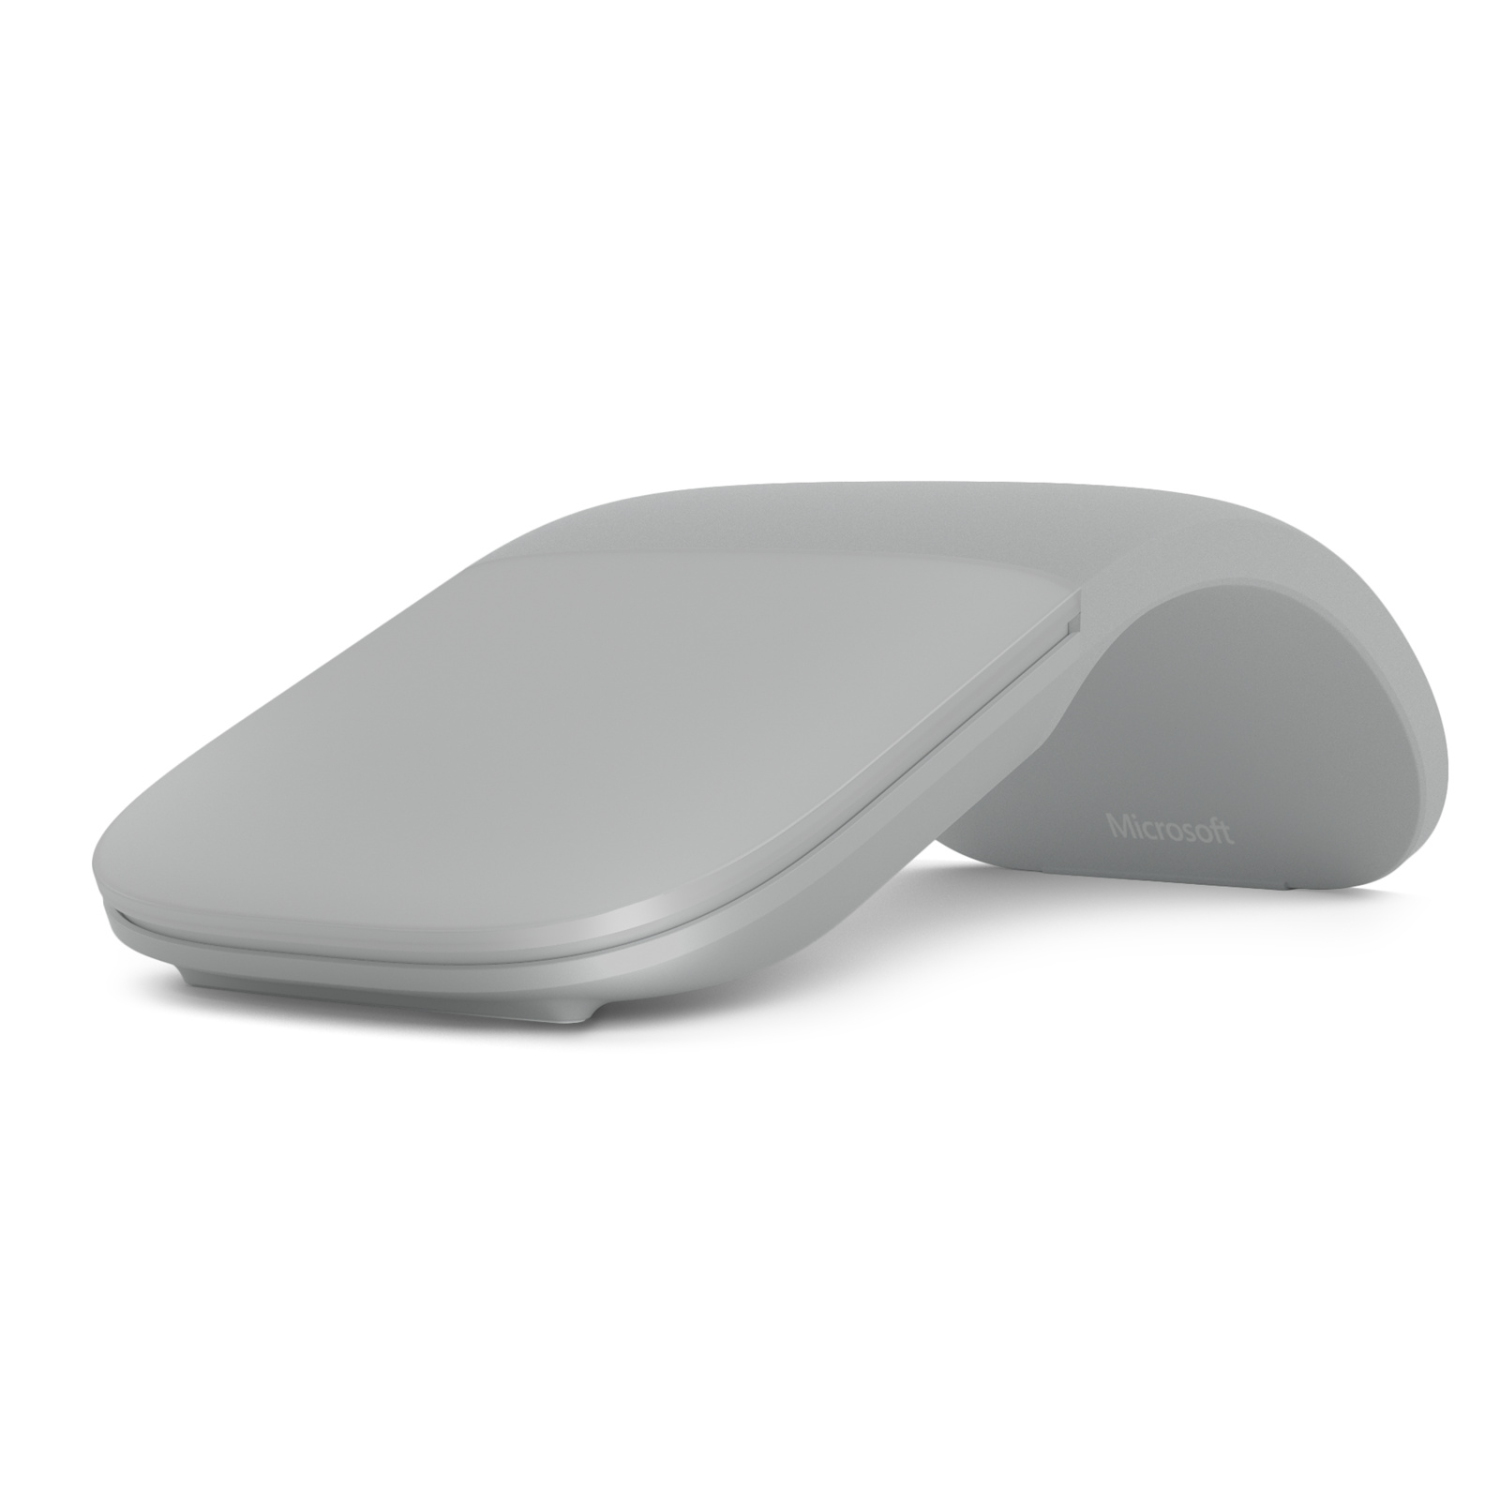 Microsoft Surface Arc Mouse Wireless Bluetooth Commercial Light Gray-(FHD-00001)